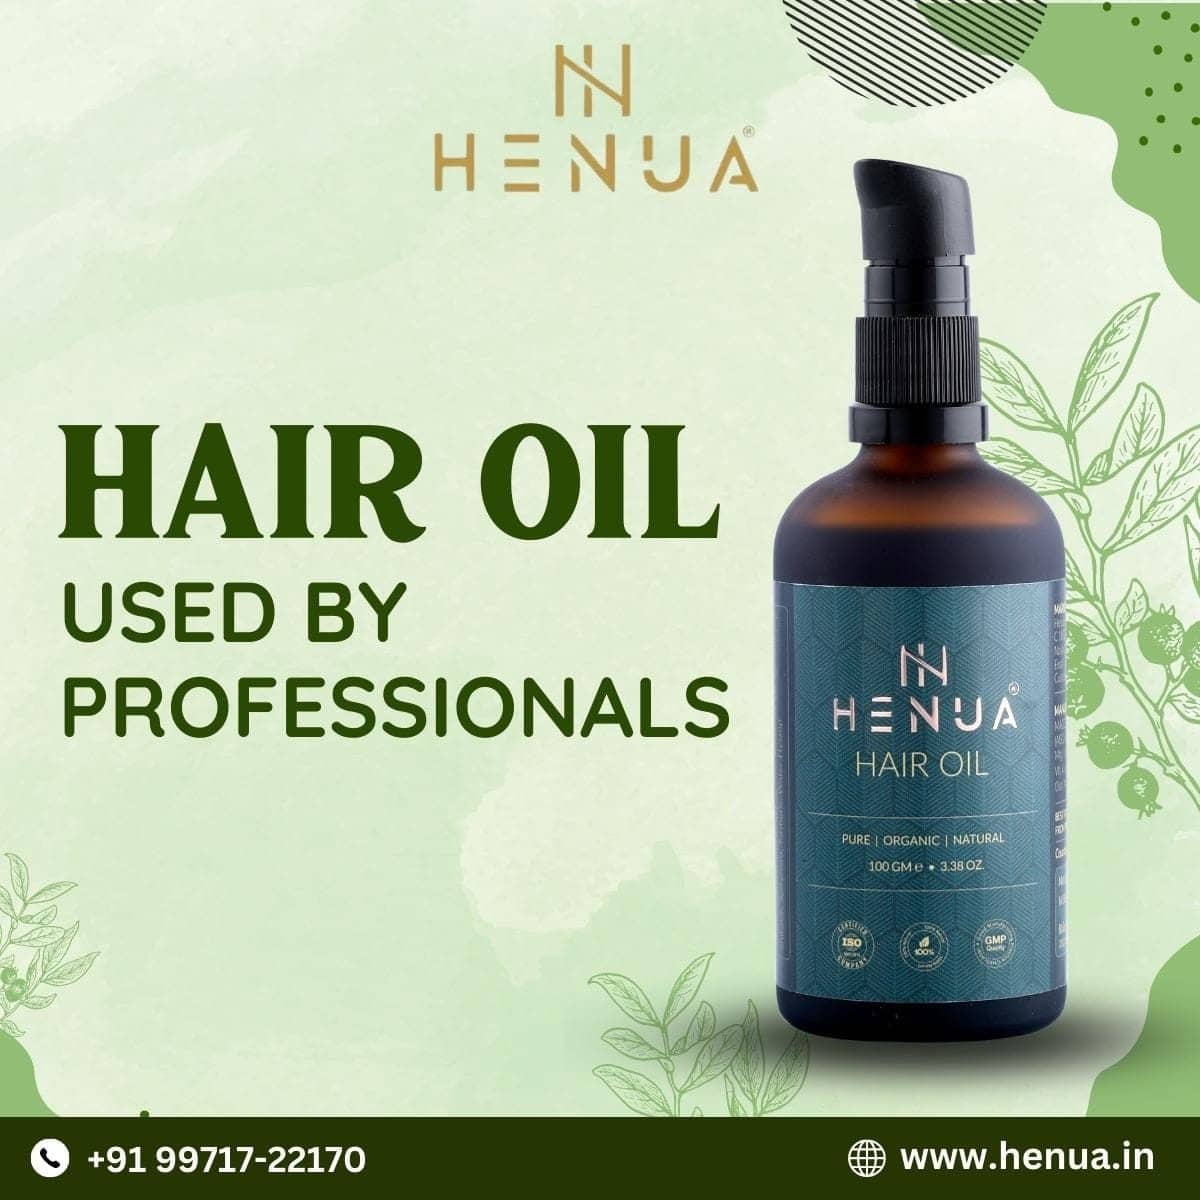 Choose-The-Organic-Hair-Oil-Used-By-Professionals-Henua